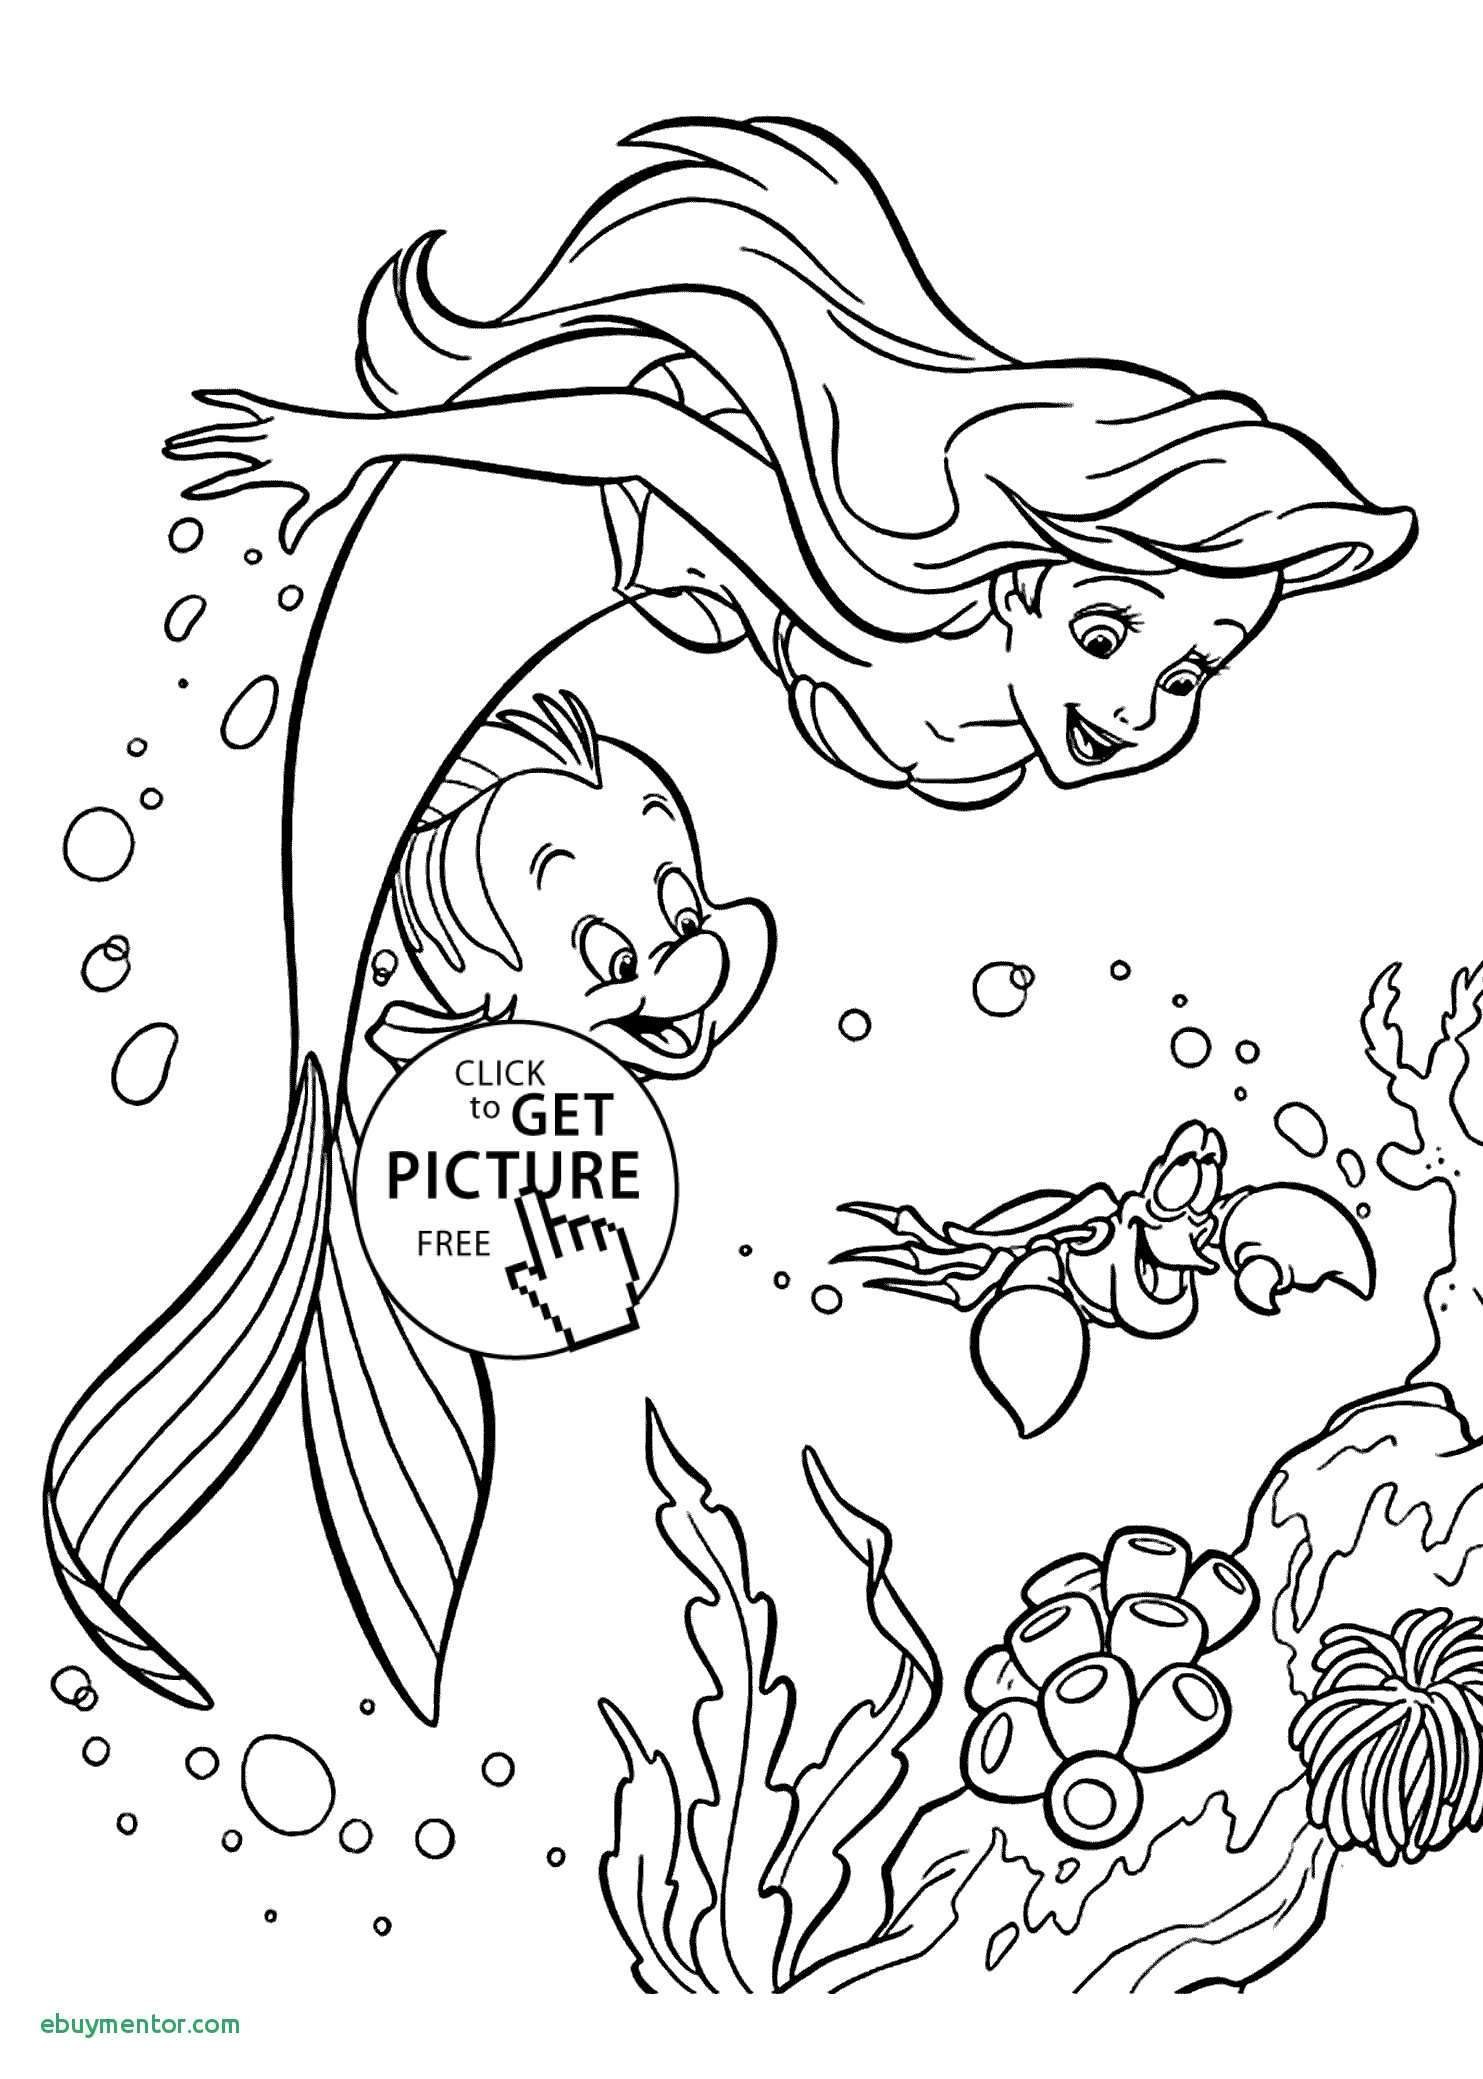 Barbie Halloween Coloring Pages Ken And Barbie Coloring Pages Luxury Barbie Coloring Sheets Best